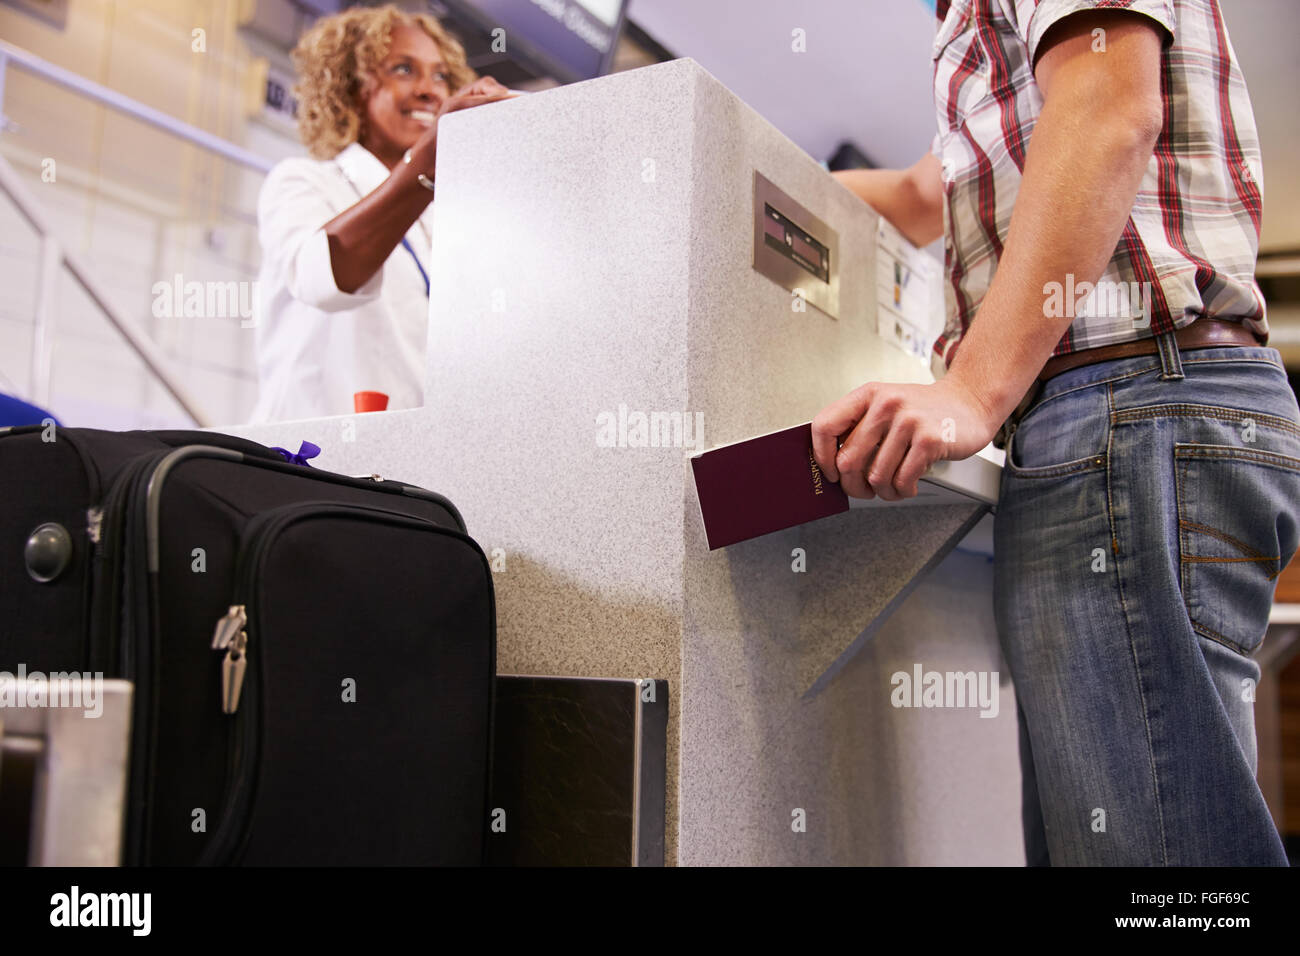 https://c8.alamy.com/comp/FGF69C/passenger-weighing-luggage-at-airport-check-in-FGF69C.jpg